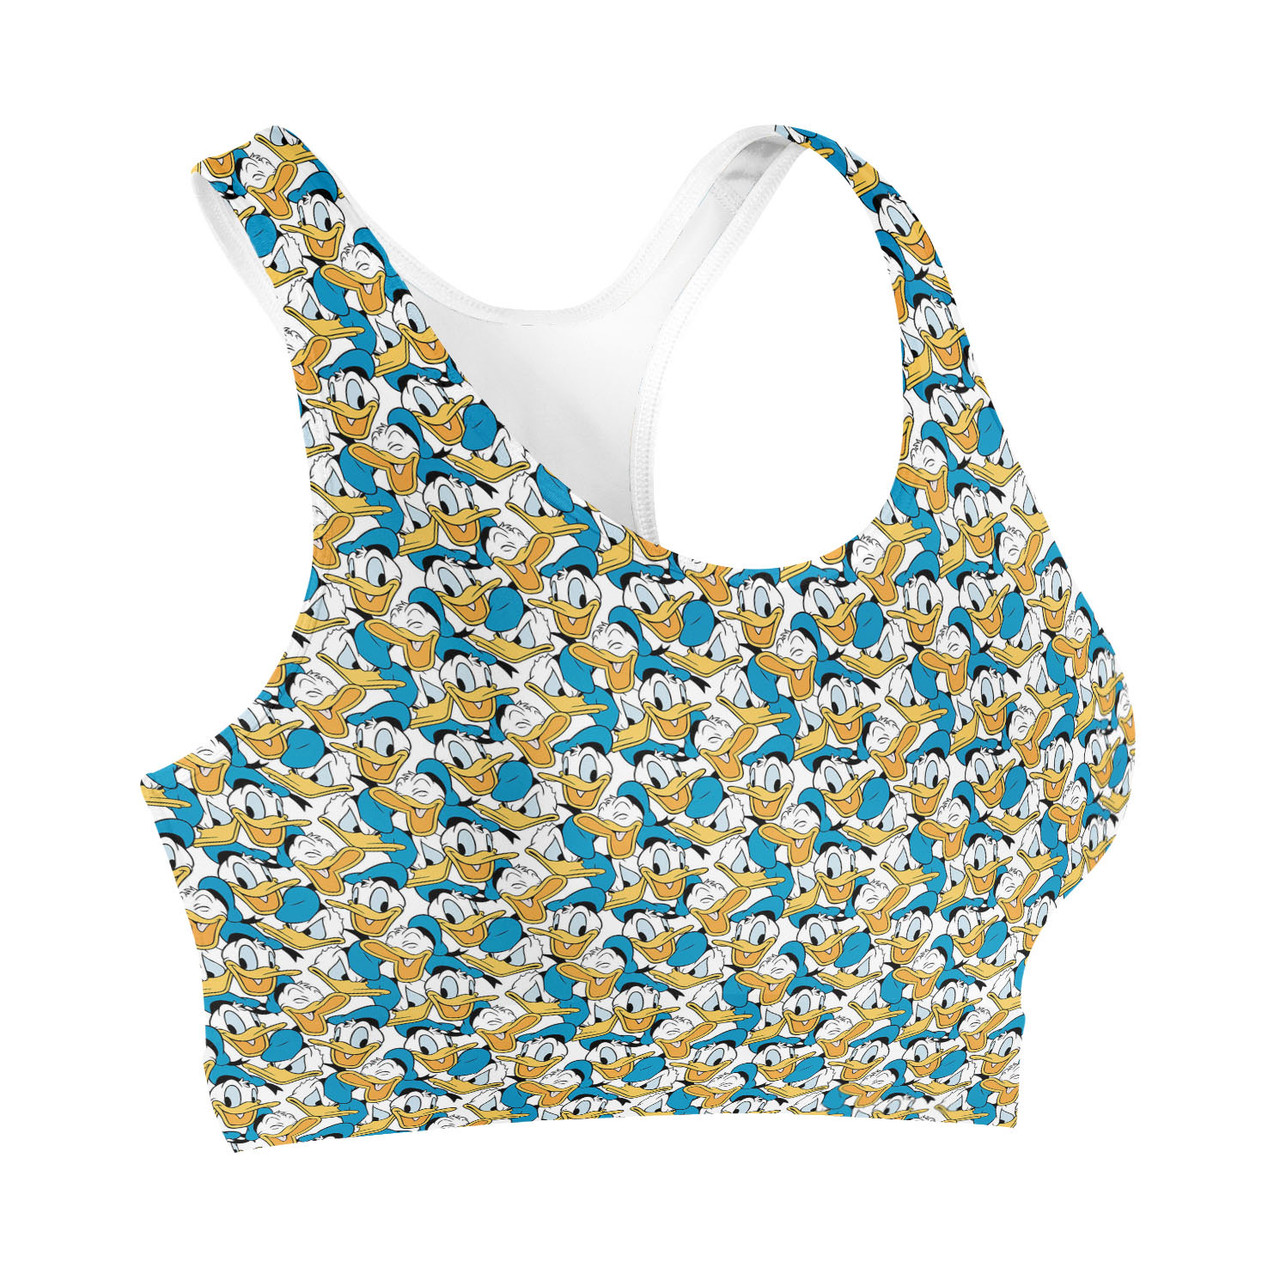 Sports Bra - Many Faces of Donald Duck